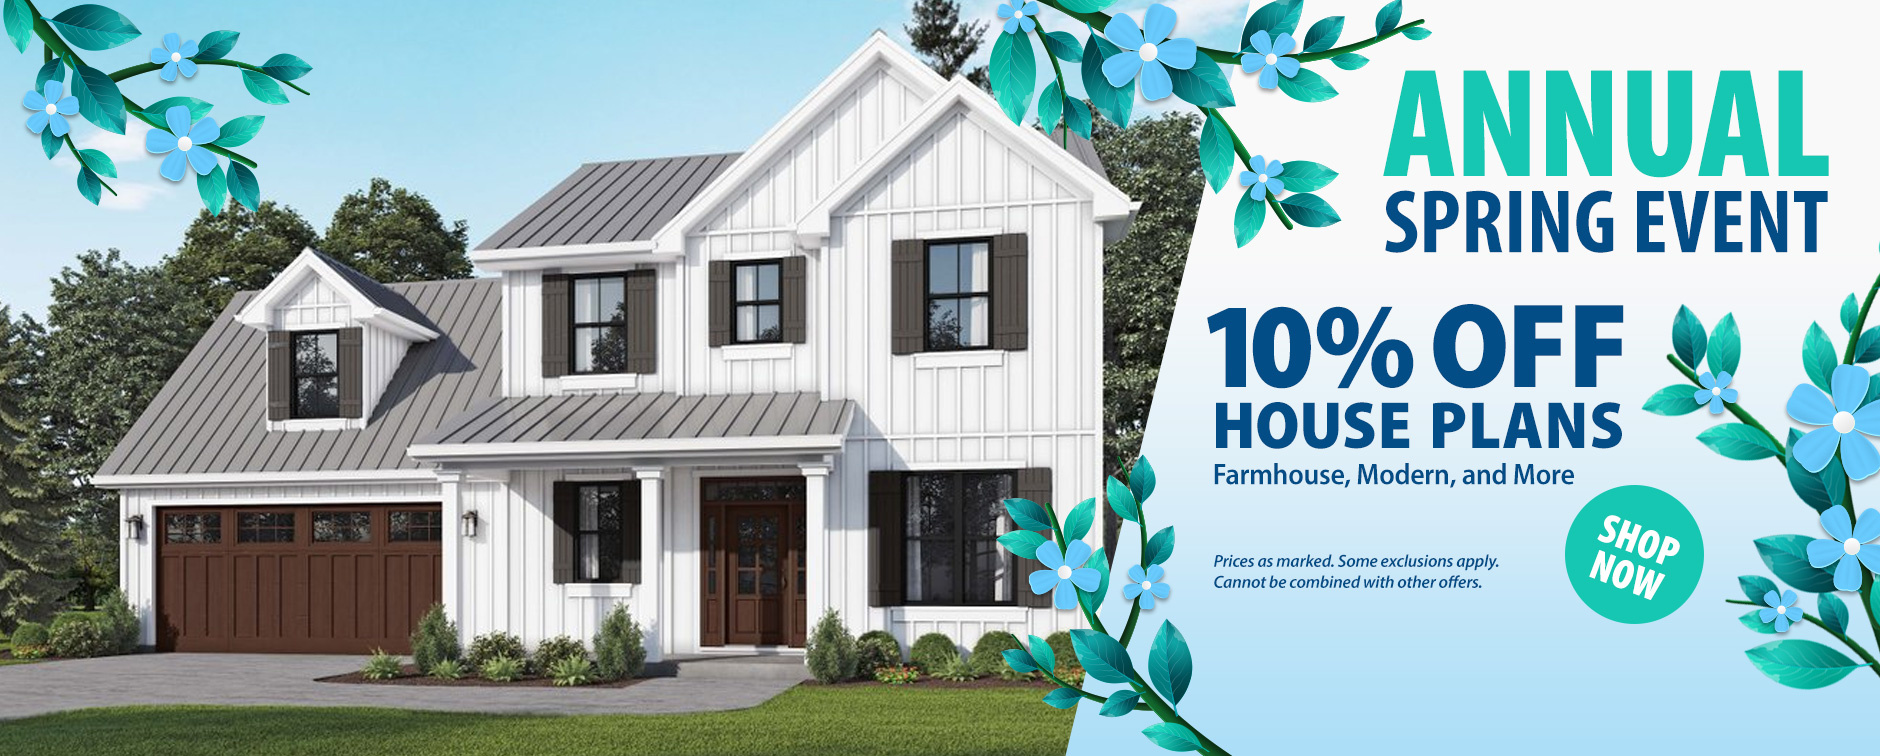 10% Off House Plans - Farmhouse, Modern, and More